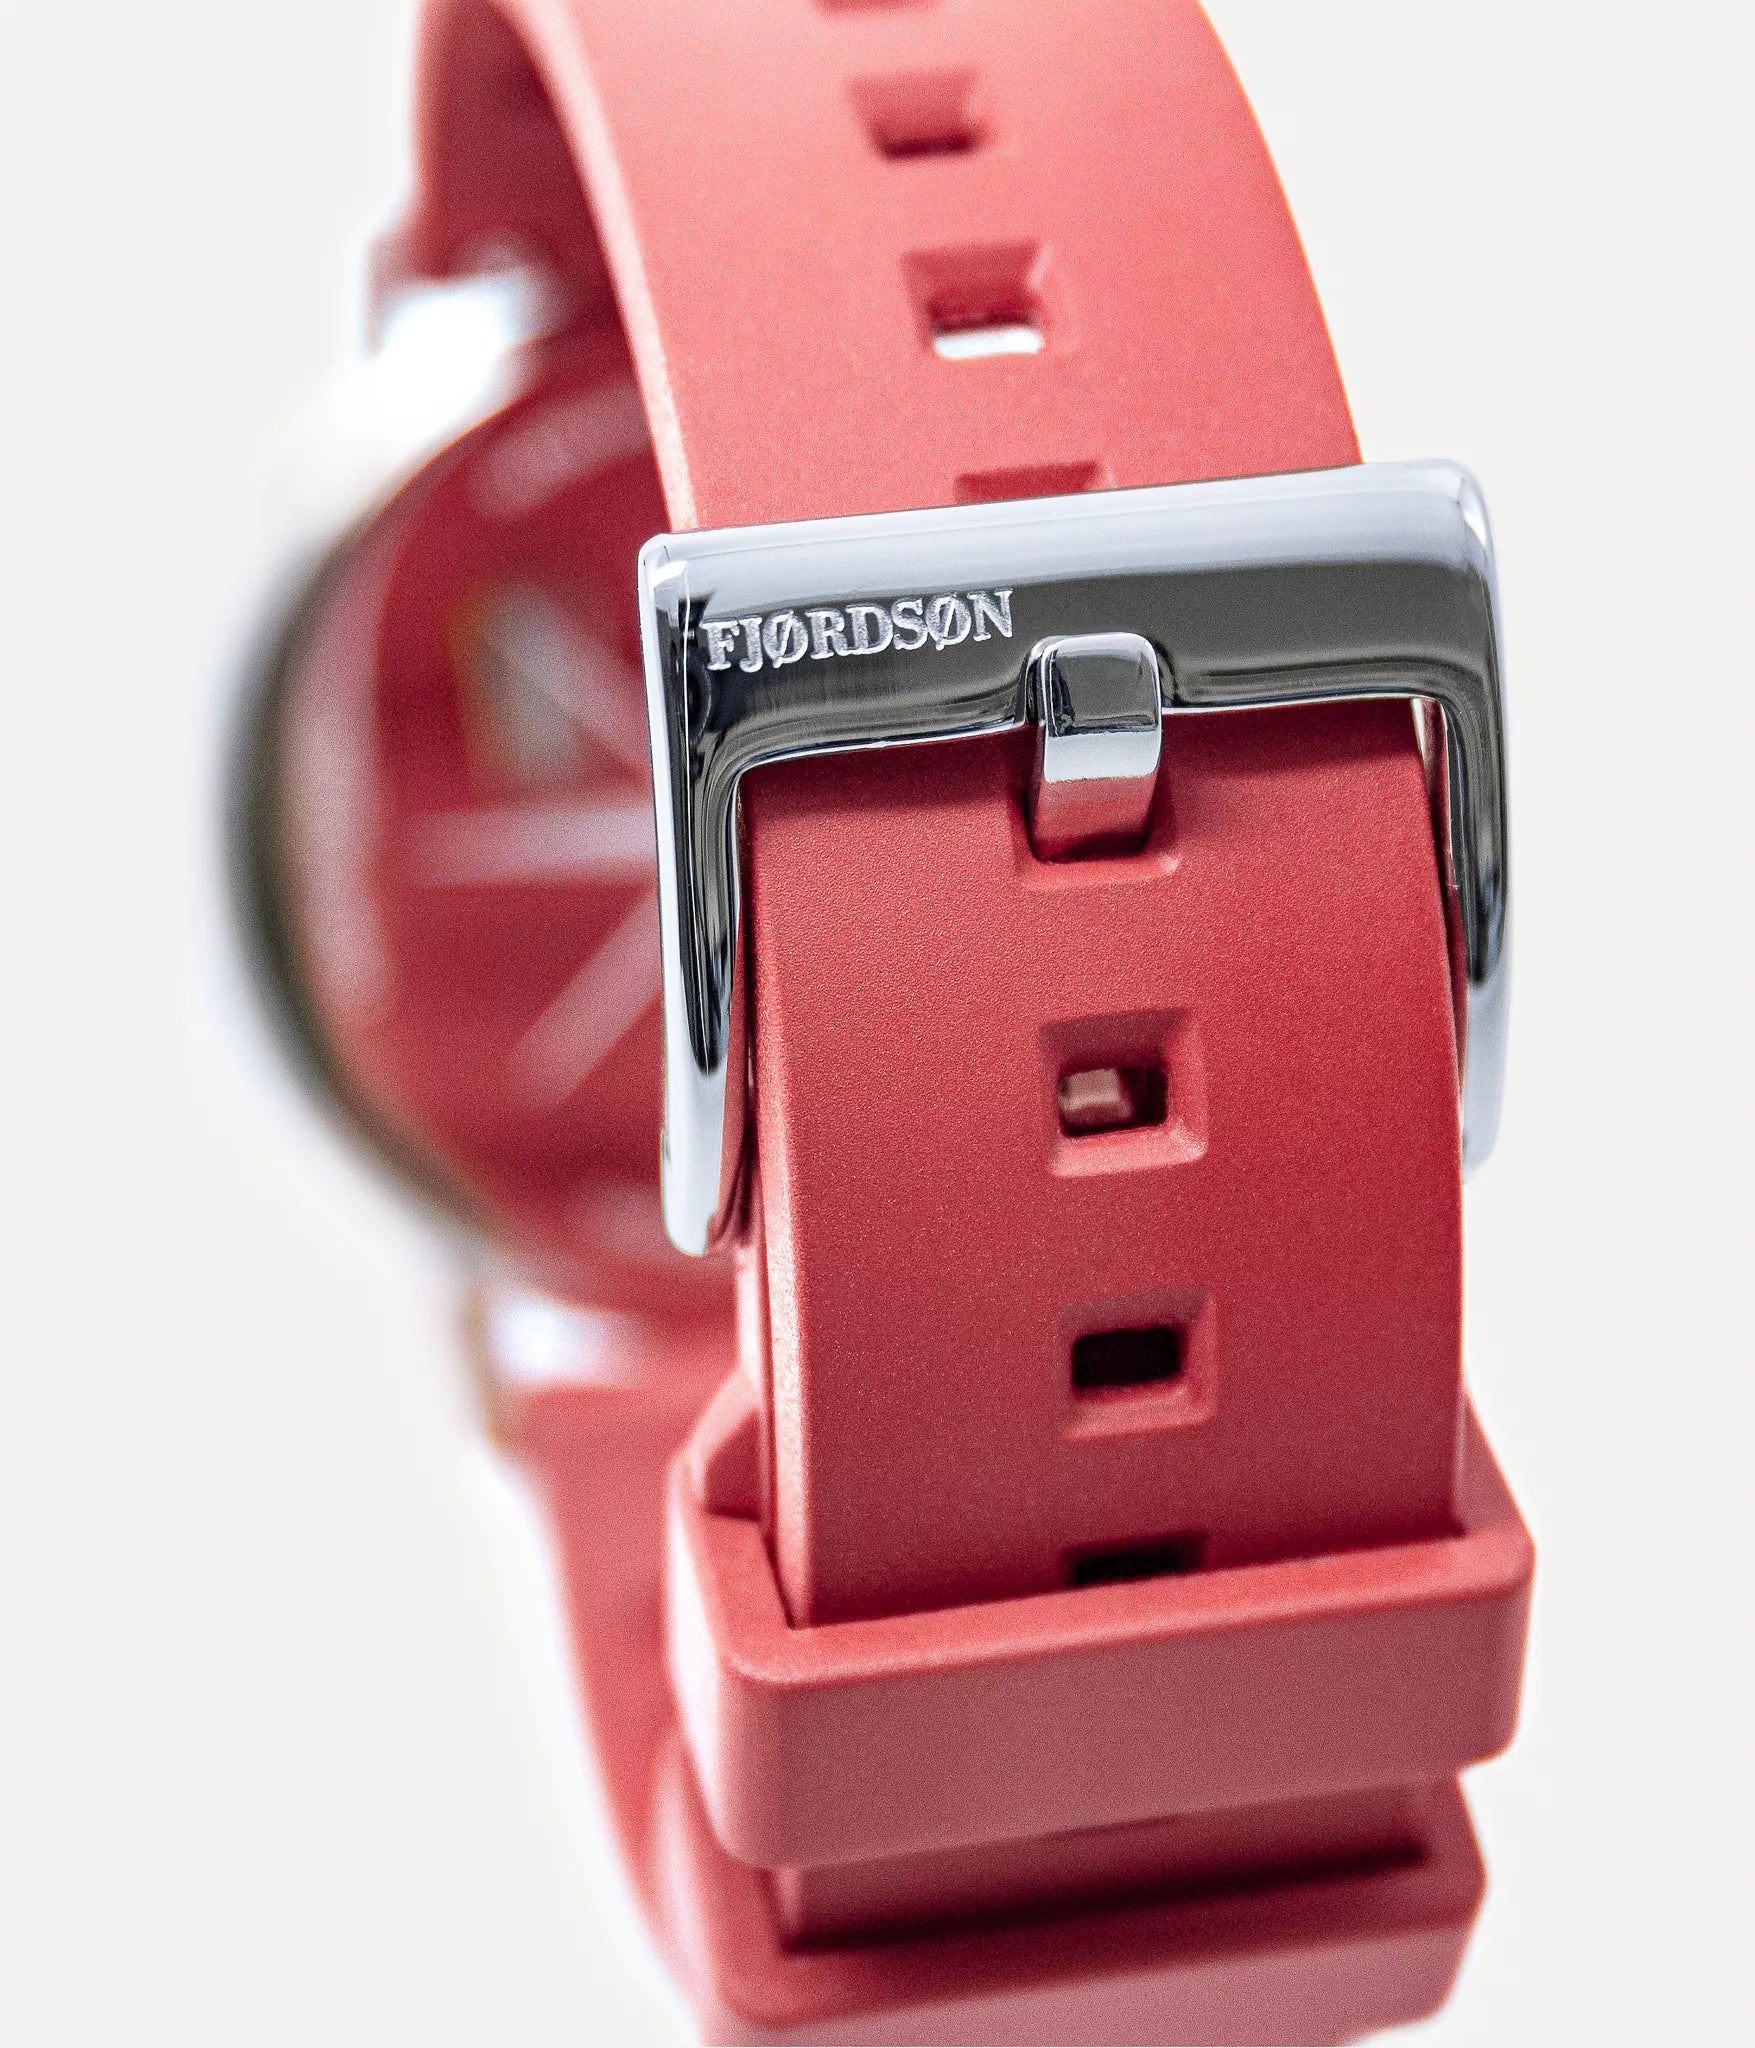 Watch strap lock shot - Fjordson watch with white dial and red rubber watch strap - UNISEX - vegan & approved by PETA - Swiss made